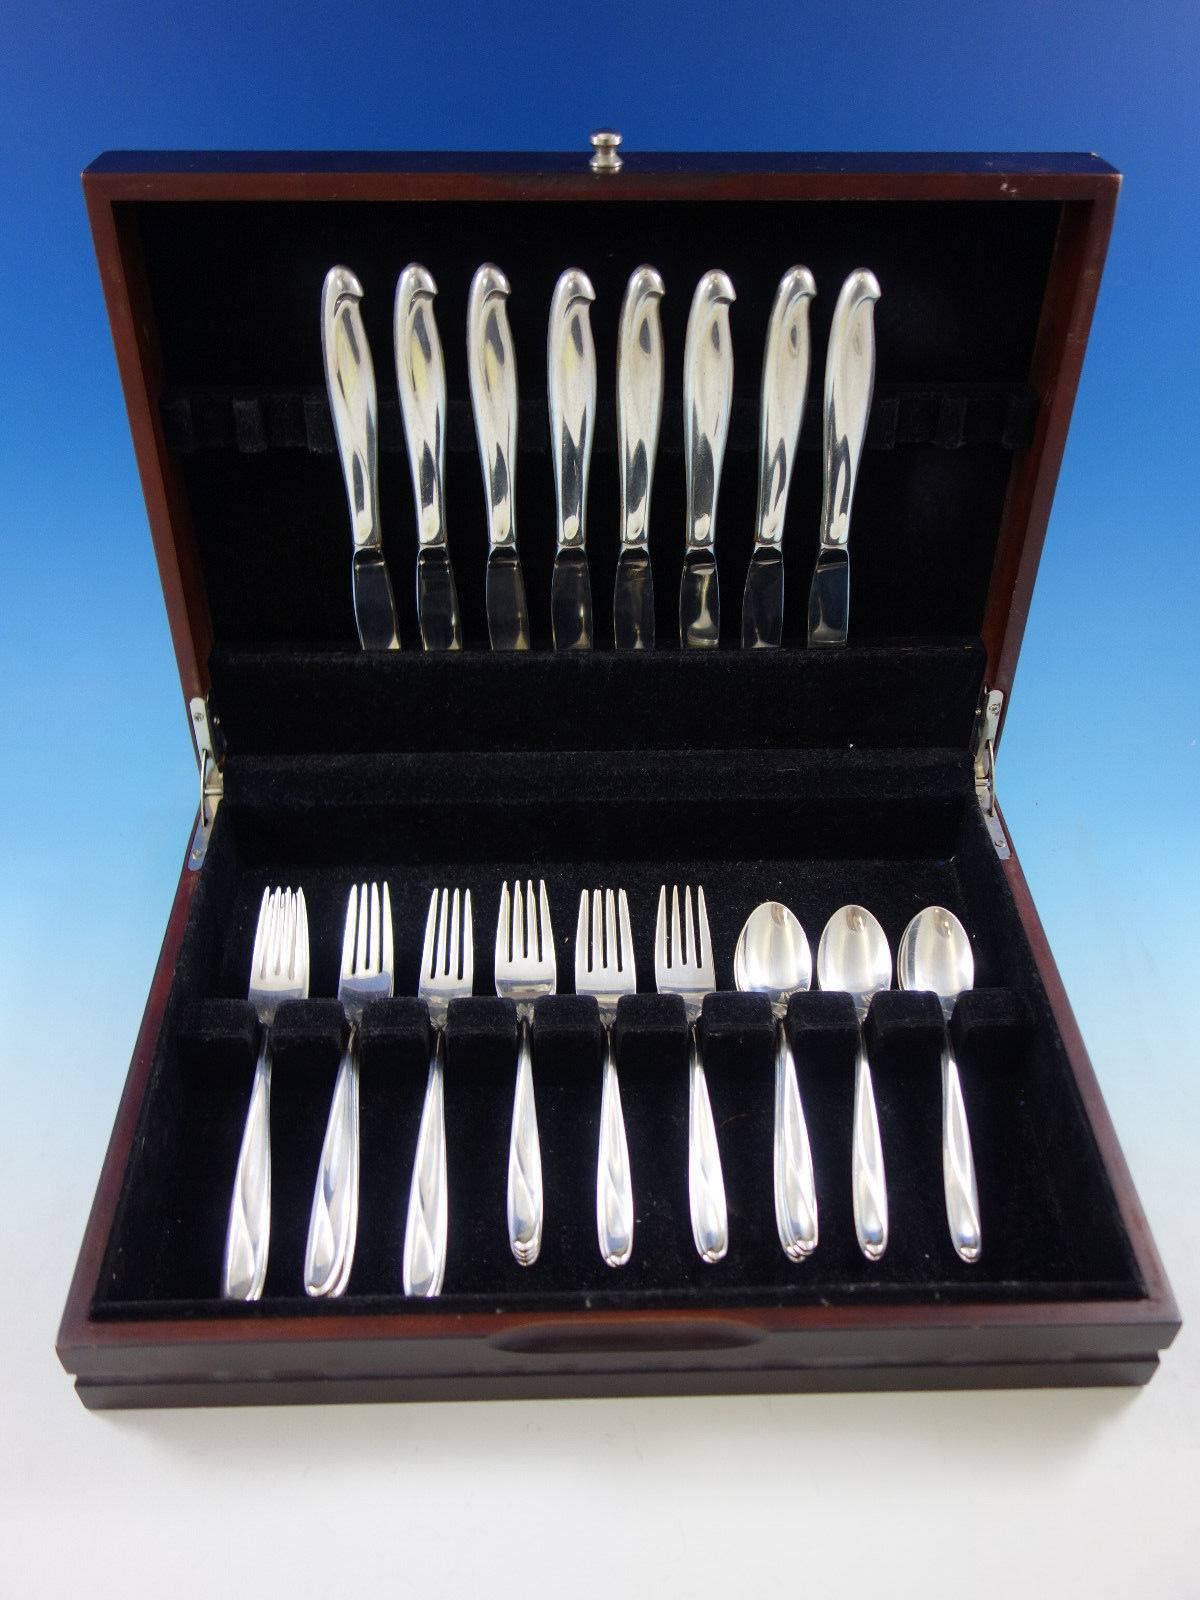 Silver sculpture by reed and barton sterling silver flatware set, 32 pieces. This set includes: 

eight knives, 9